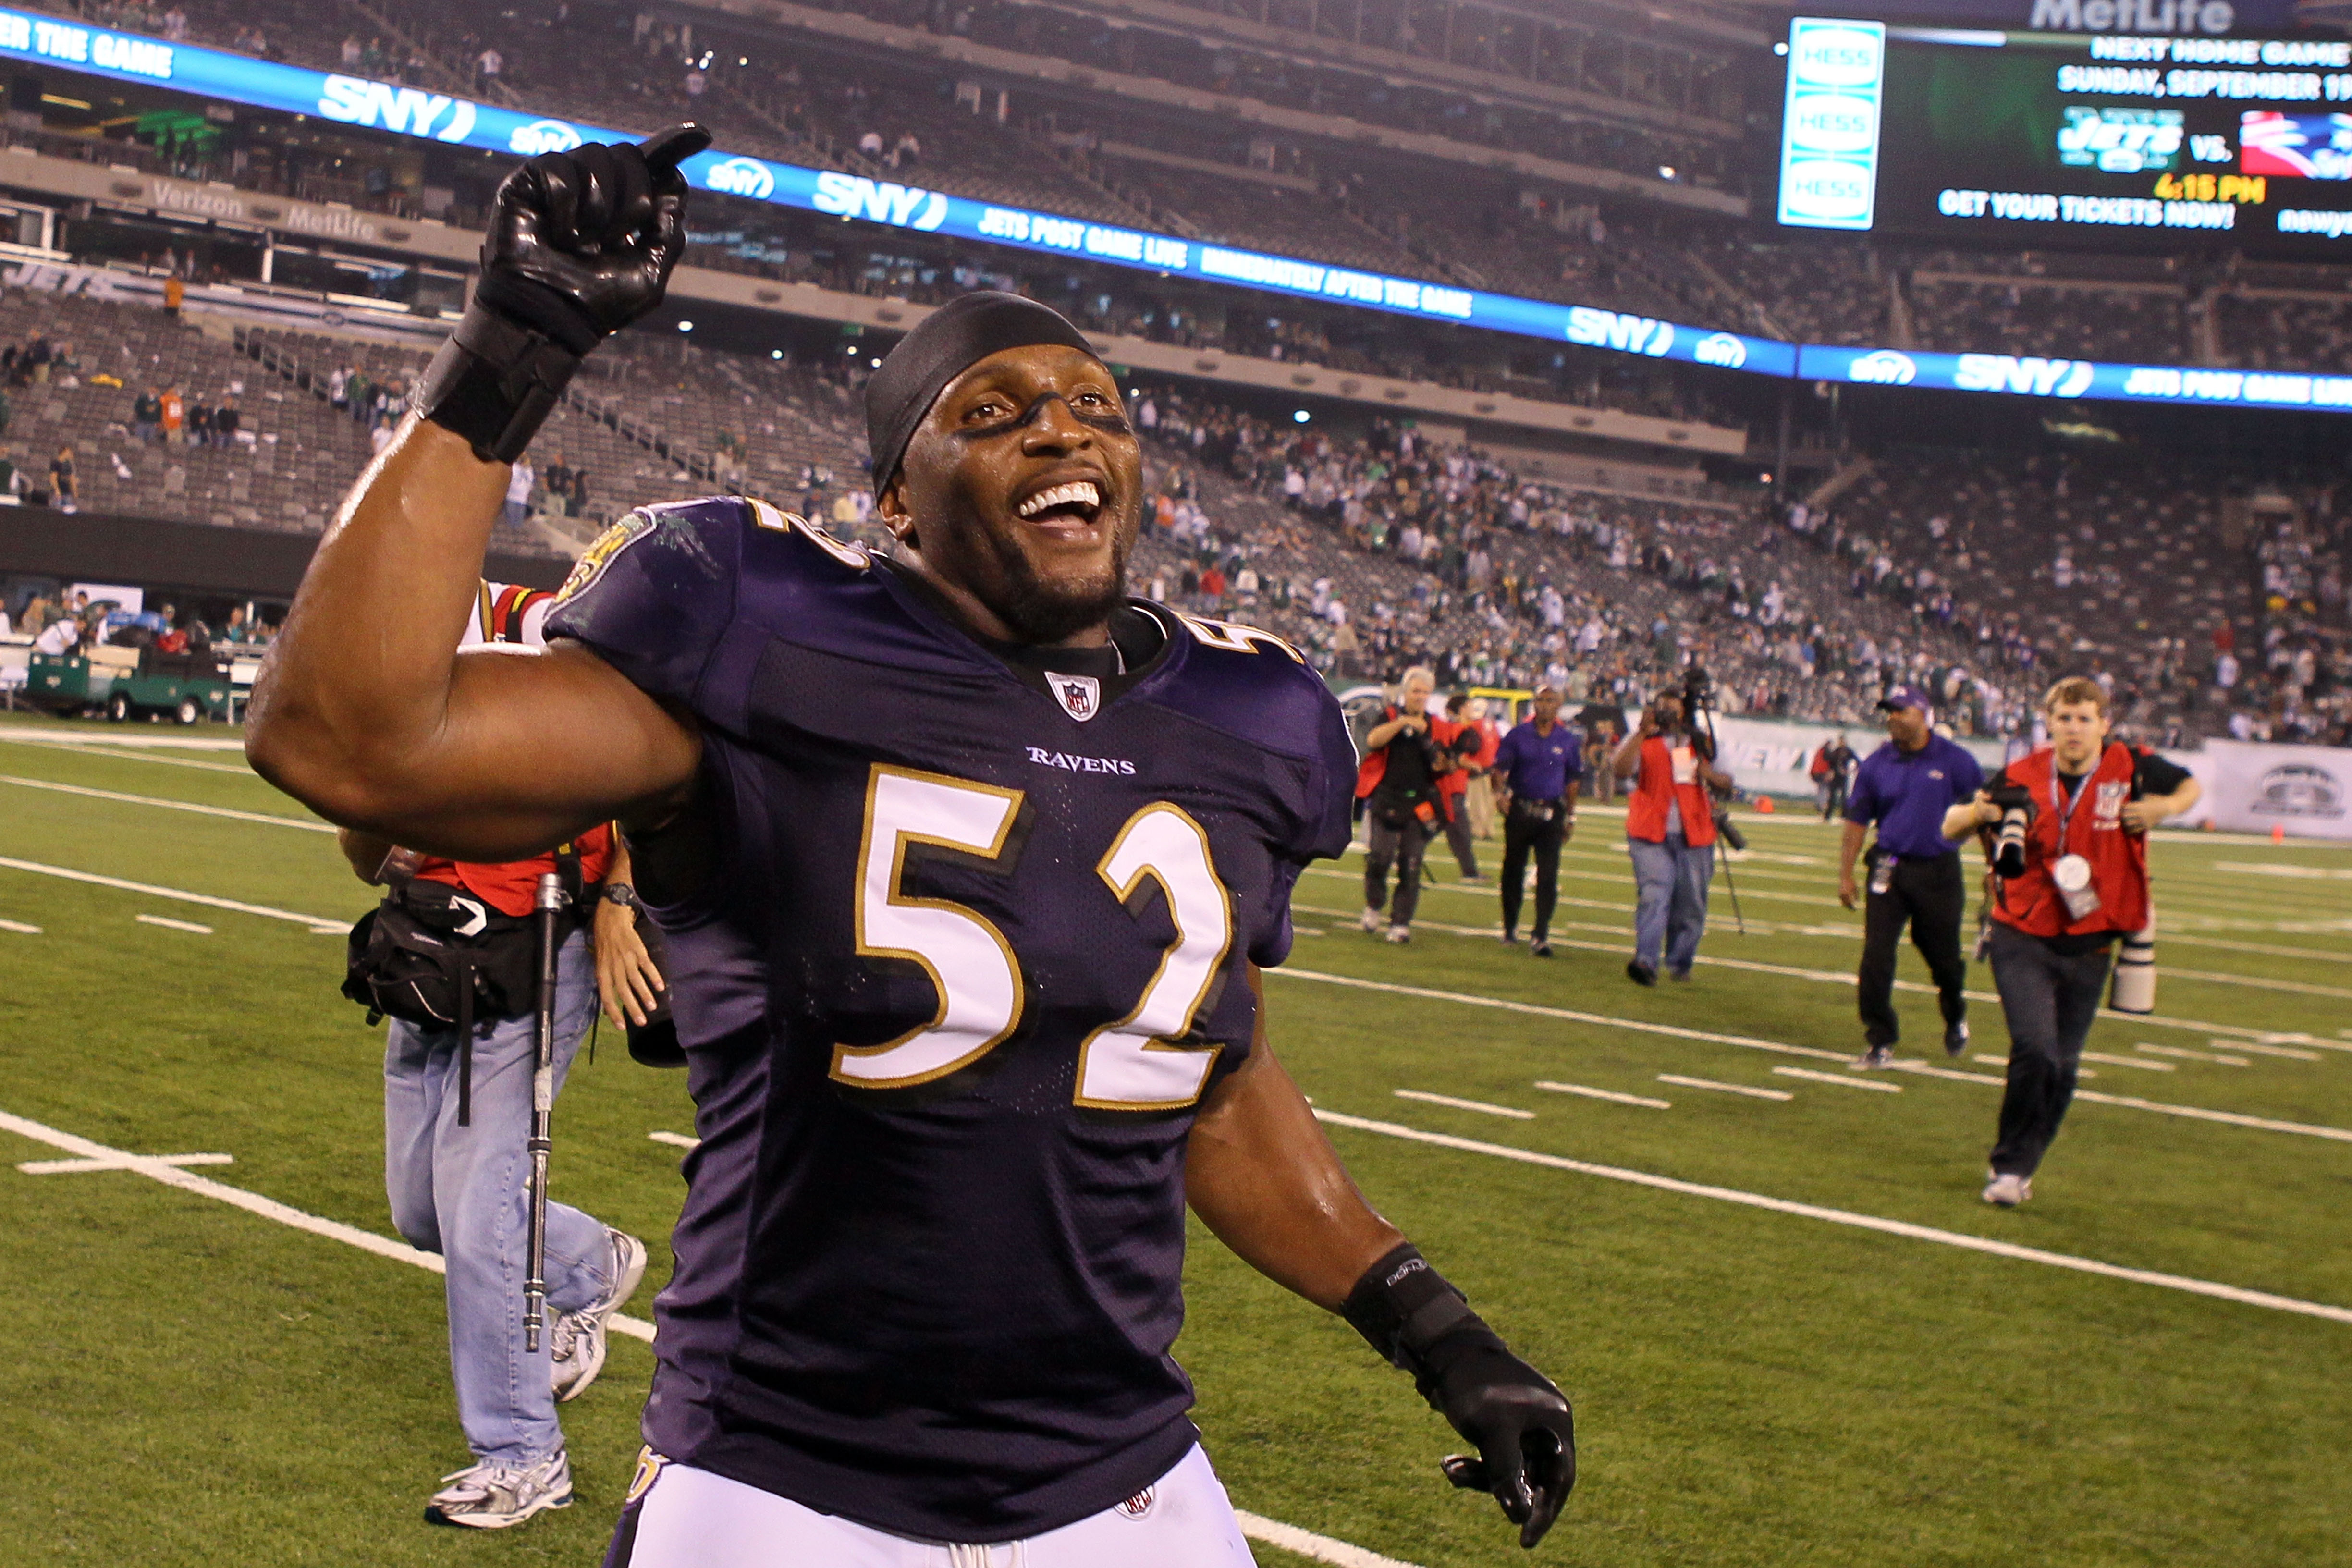 EAST RUTHERFORD, NJ - SEPTEMBER 13:  Ray Lewis #52 of the Baltimore Ravens reacts after defeating the New York Jets during their home opener at the New Meadowlands Stadium on September 13, 2010 in East Rutherford, New Jersey.  (Photo by Jim McIsaac/Getty